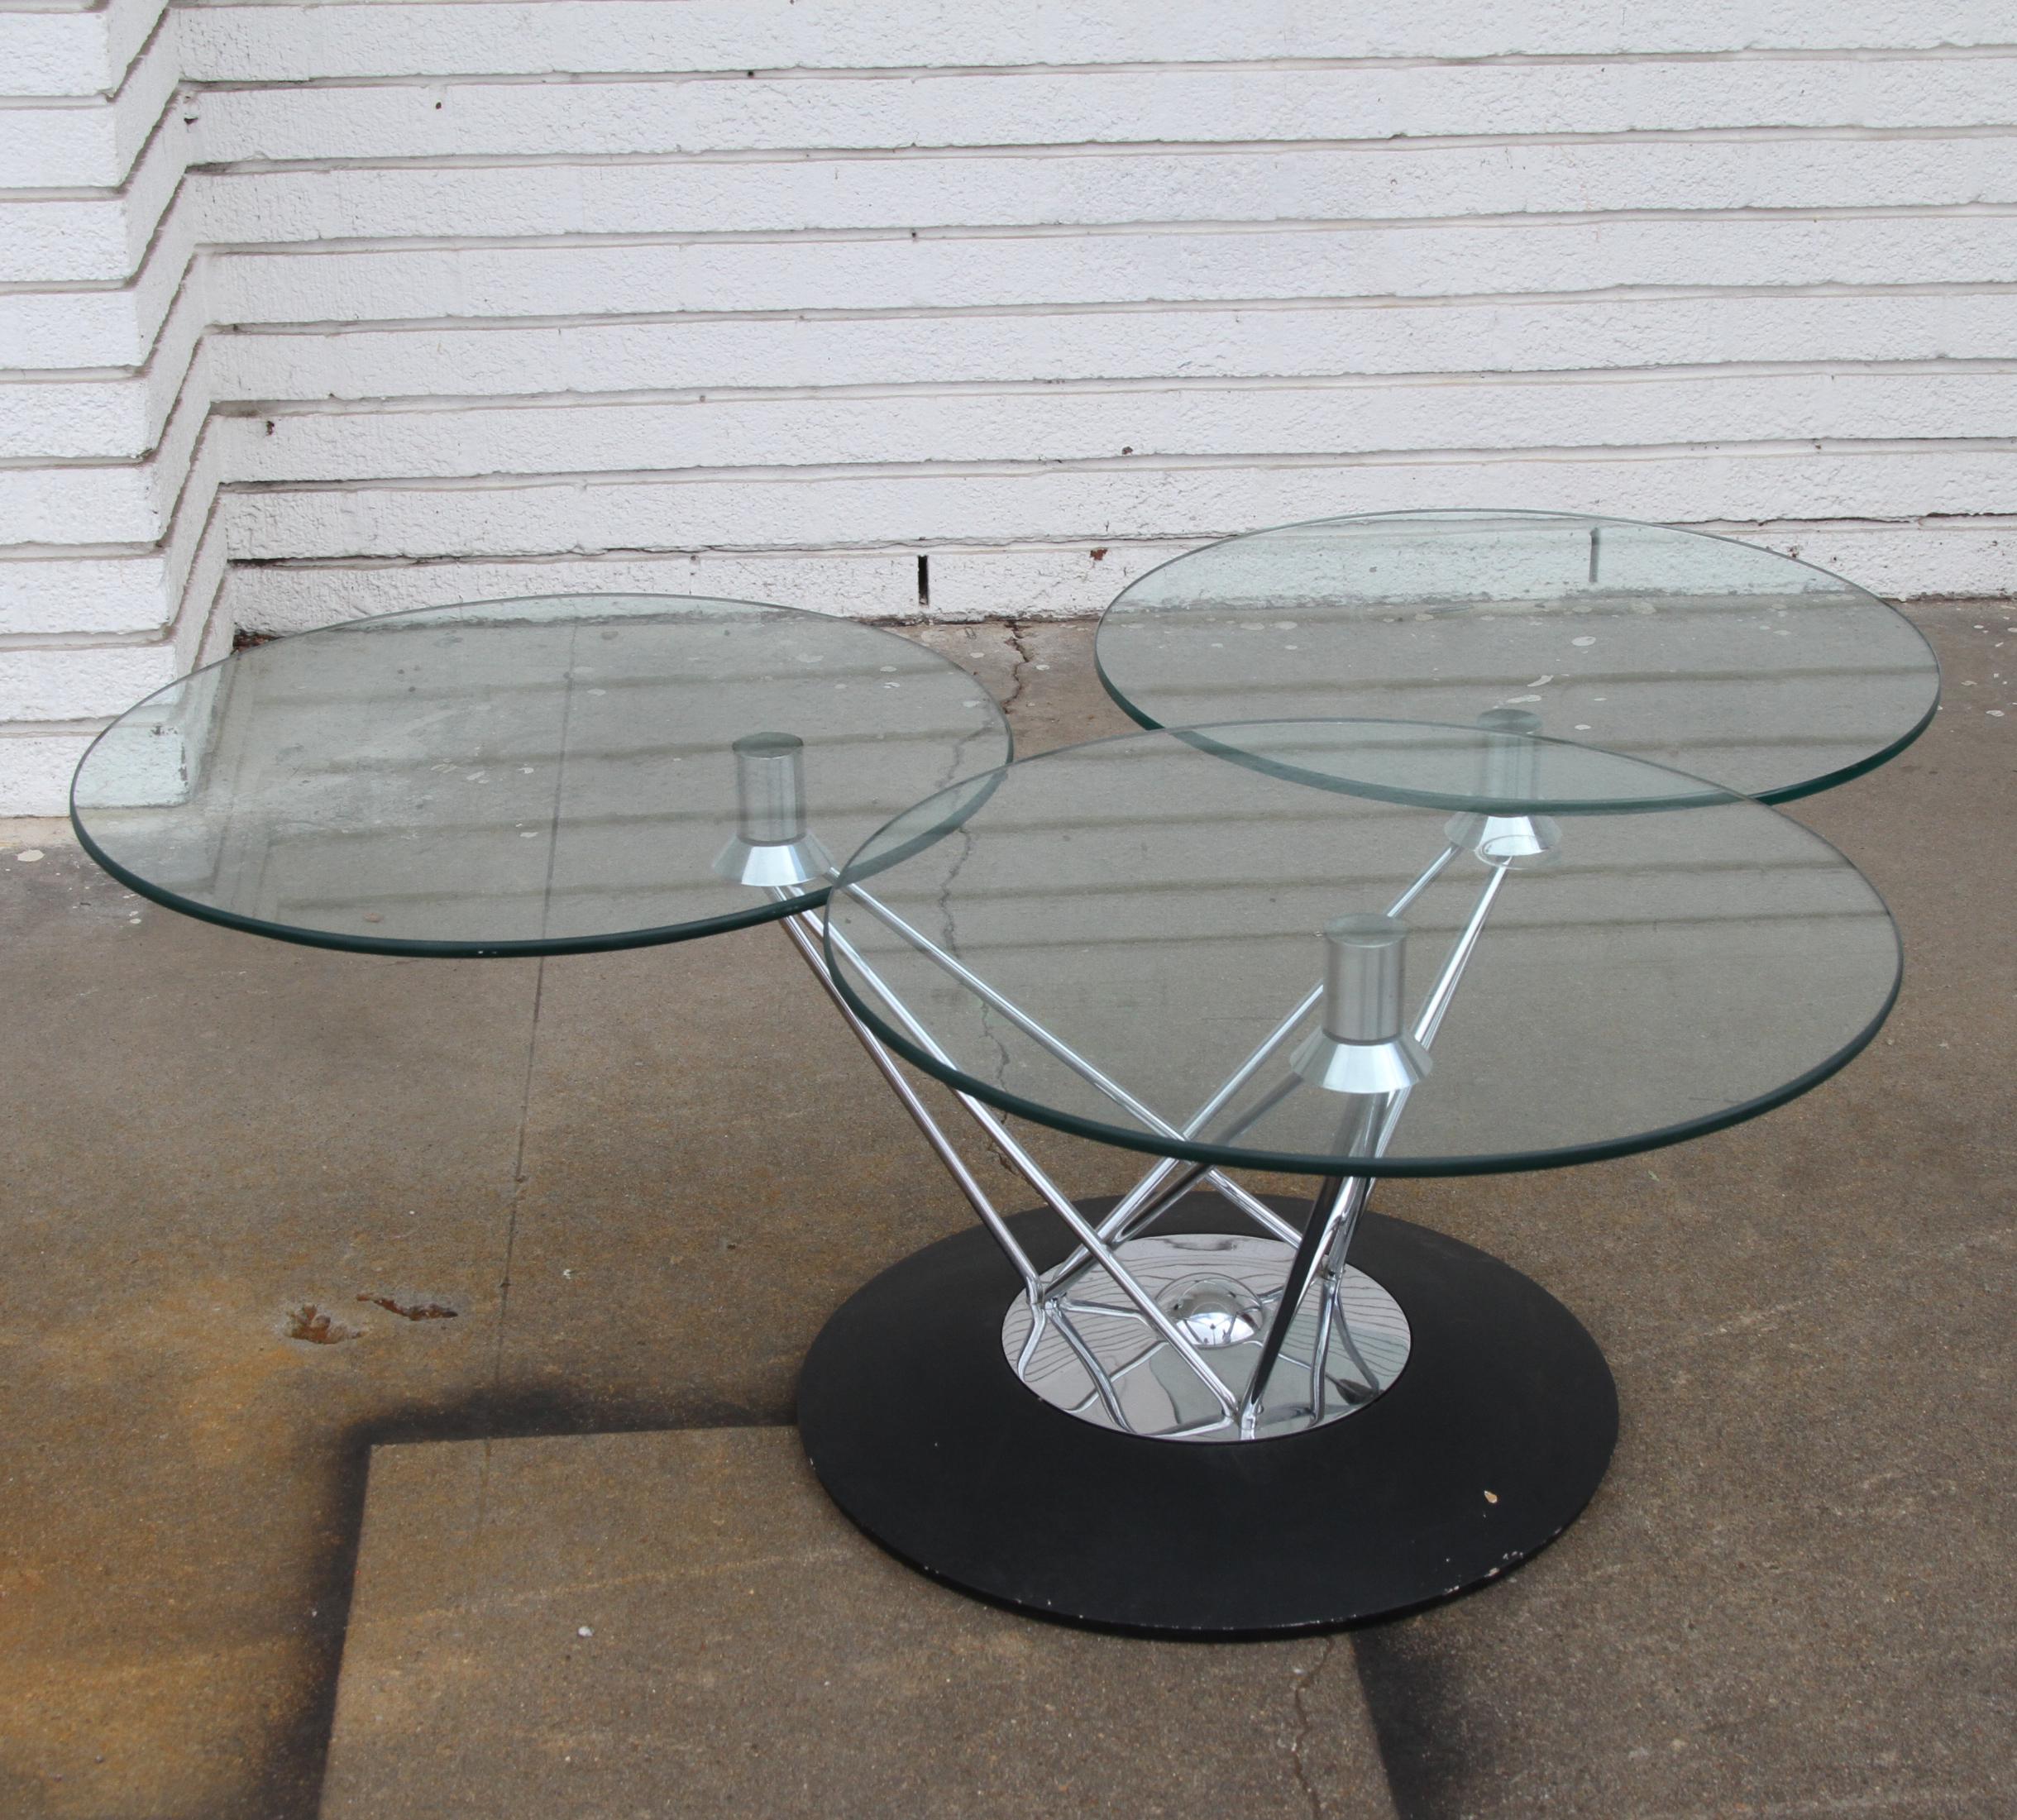 3 Piece Modern Cyclone Glass Table 

American, circa 1970
 Sculputural concave black enamel base capped with a circular polished chrome cap with a finial of the same material emanating from its center. Three angled cylindrical brass rods connect the